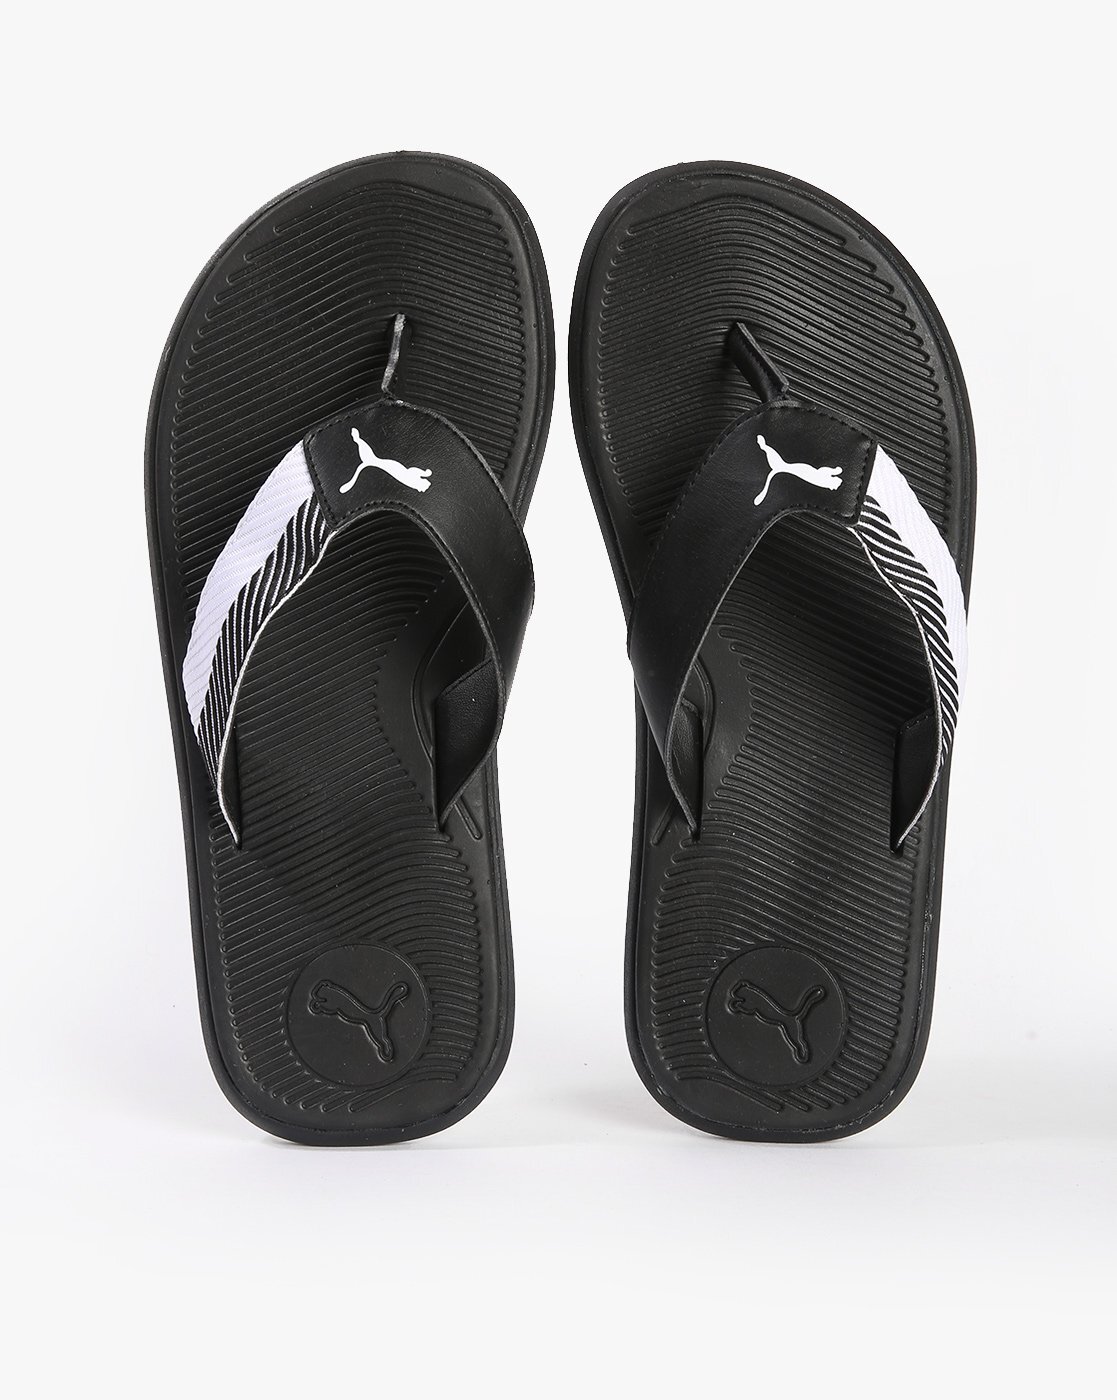 Puma Mens Slippers in Dindigul - Dealers, Manufacturers & Suppliers -  Justdial-saigonsouth.com.vn